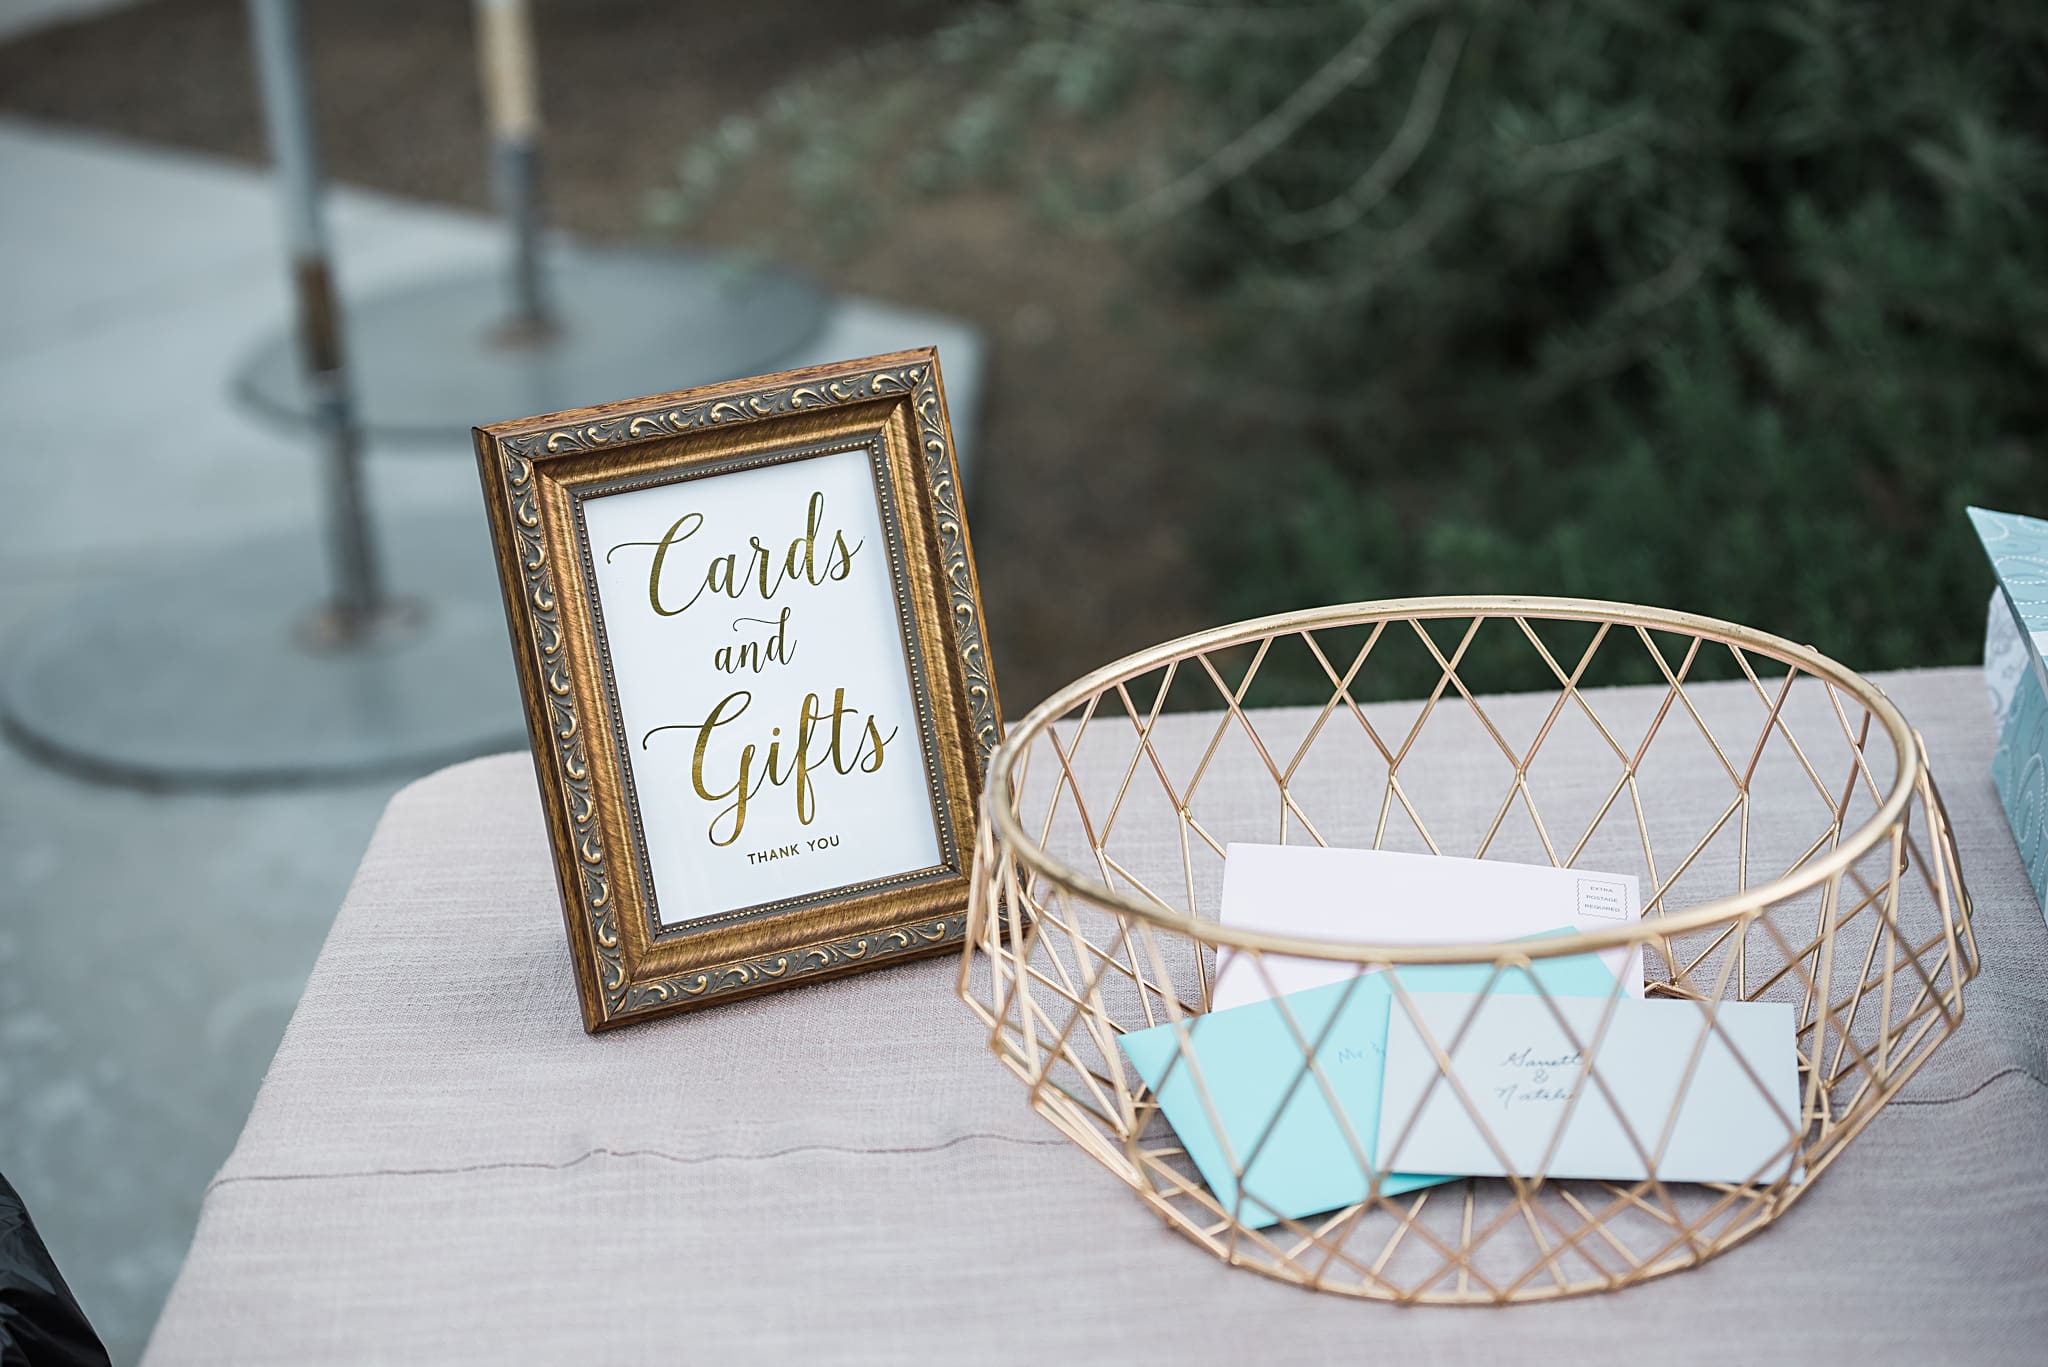 gift and cards table decor